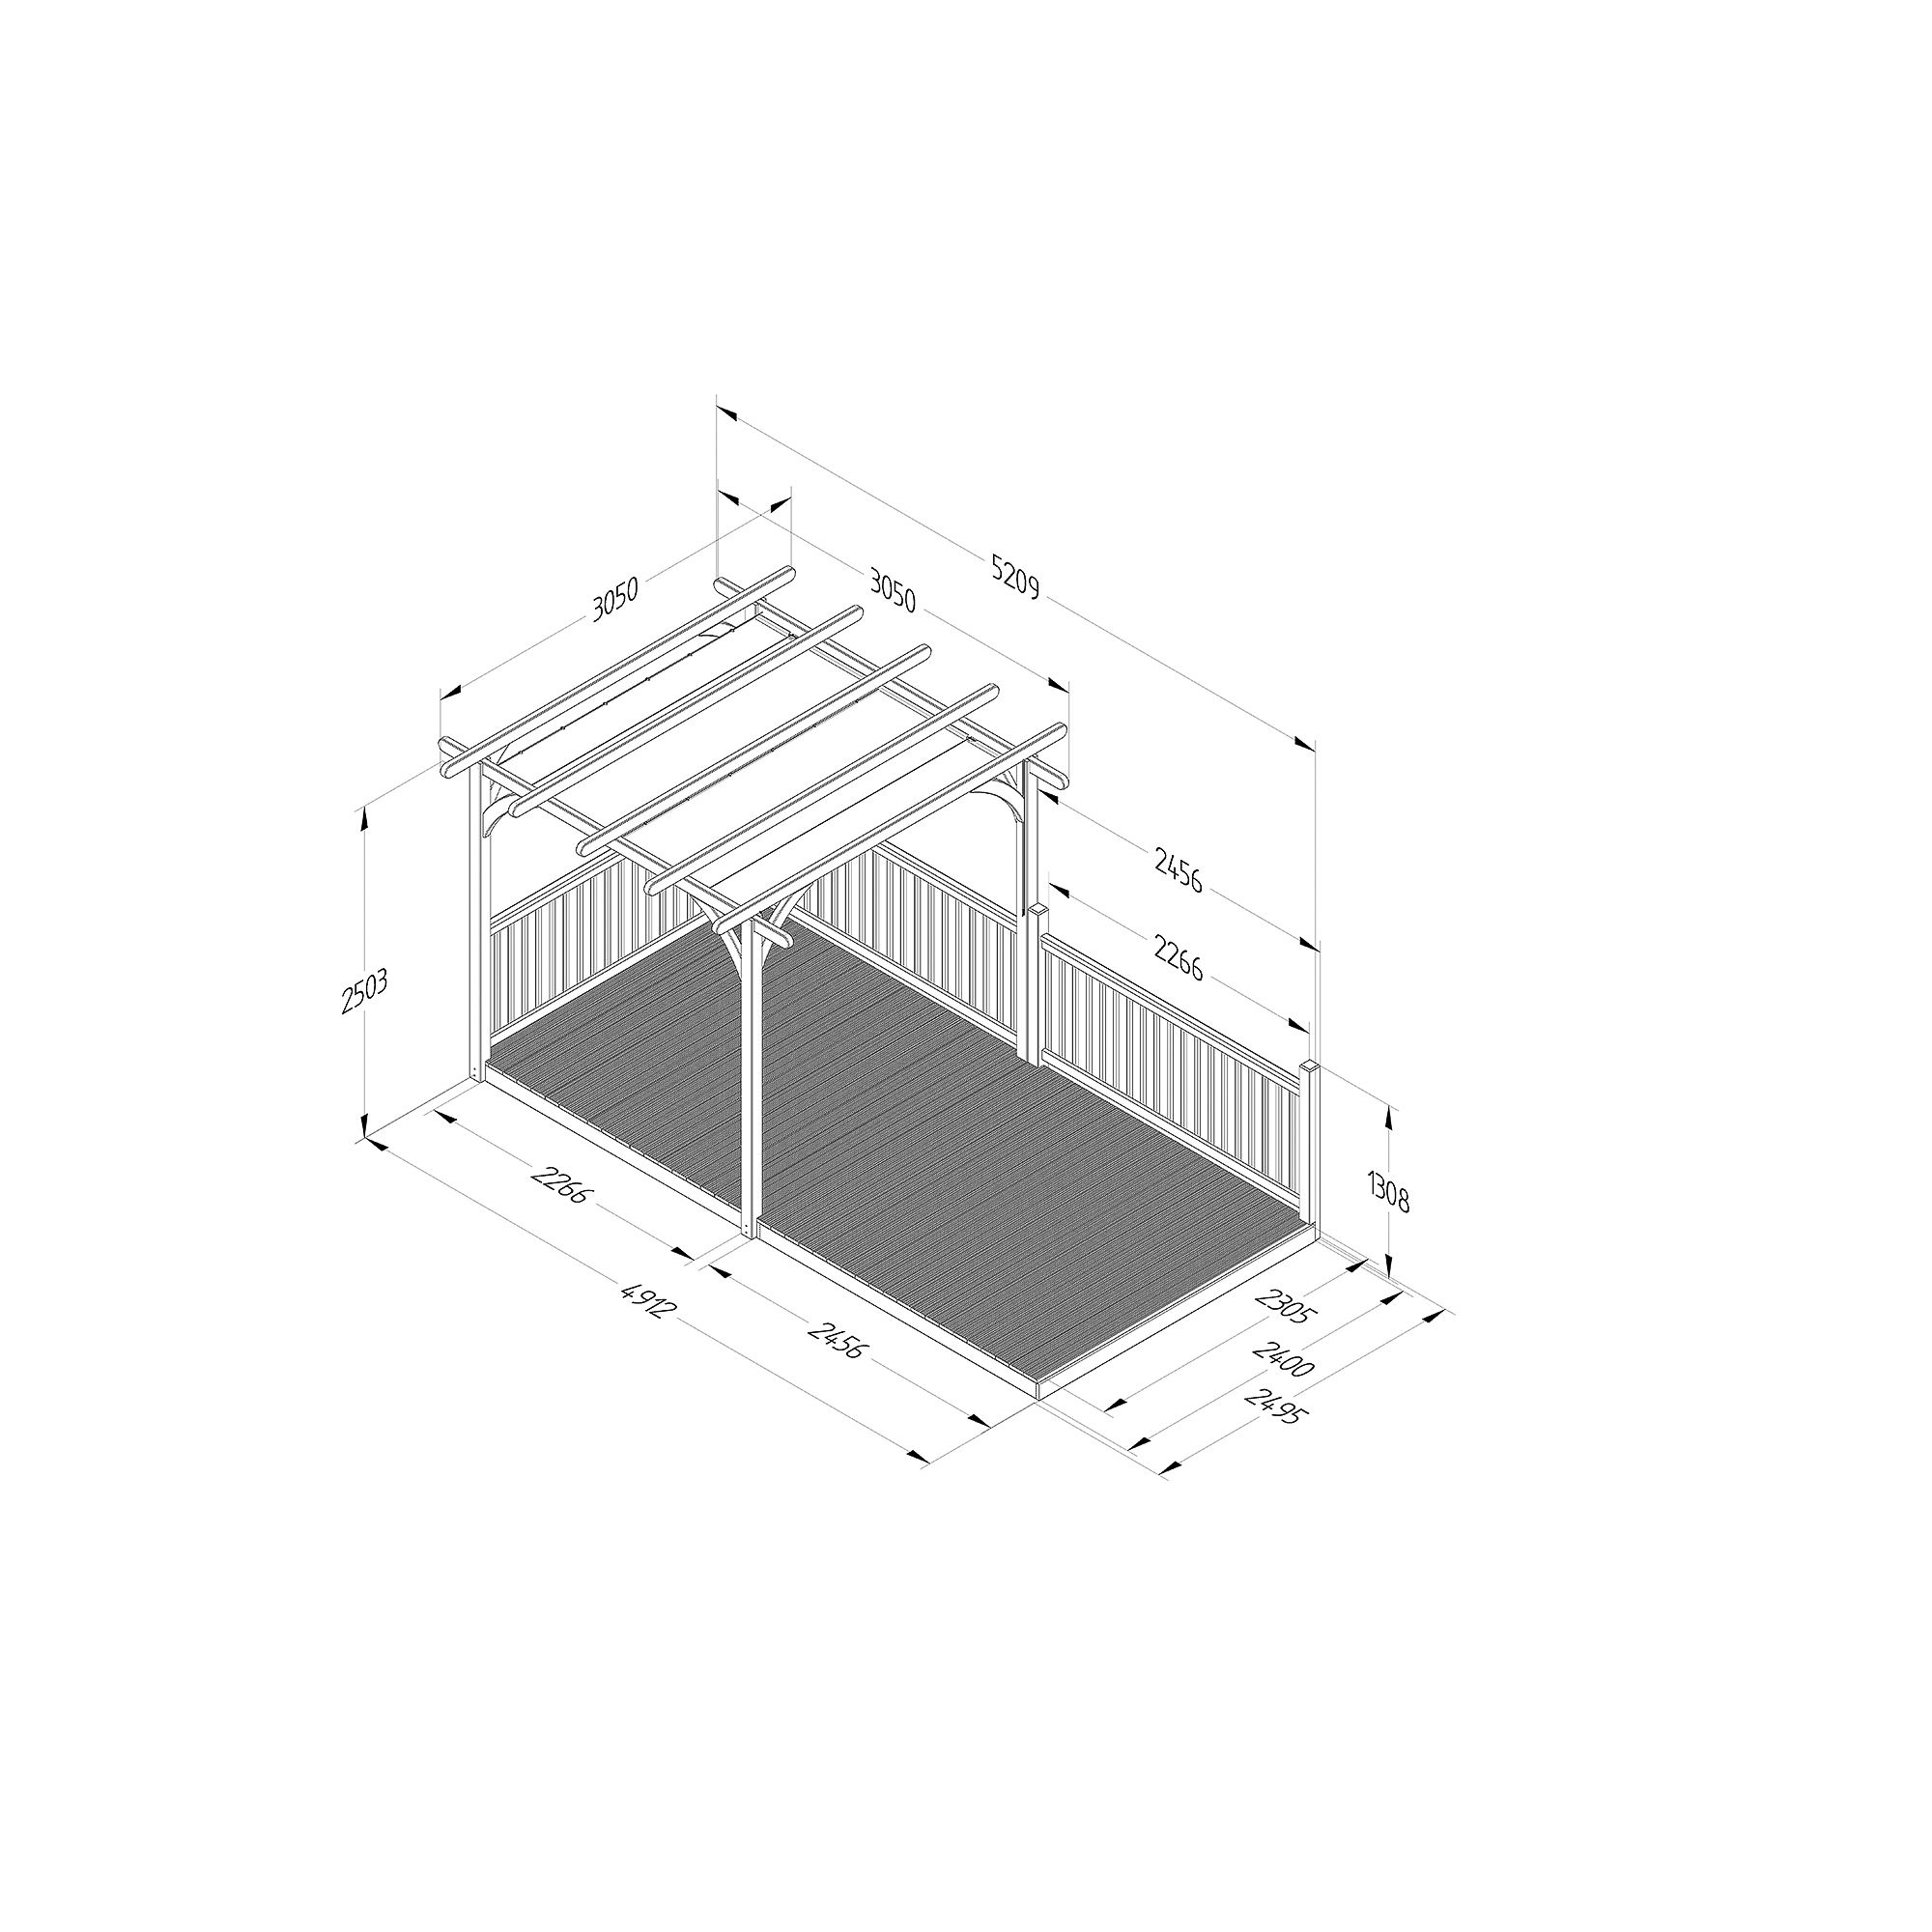 Forest Garden Grey Rectangular Pergola & decking kit, x2 Post x3 Balustrade (H) 2.5m x (W) 5.2m - Canopy included